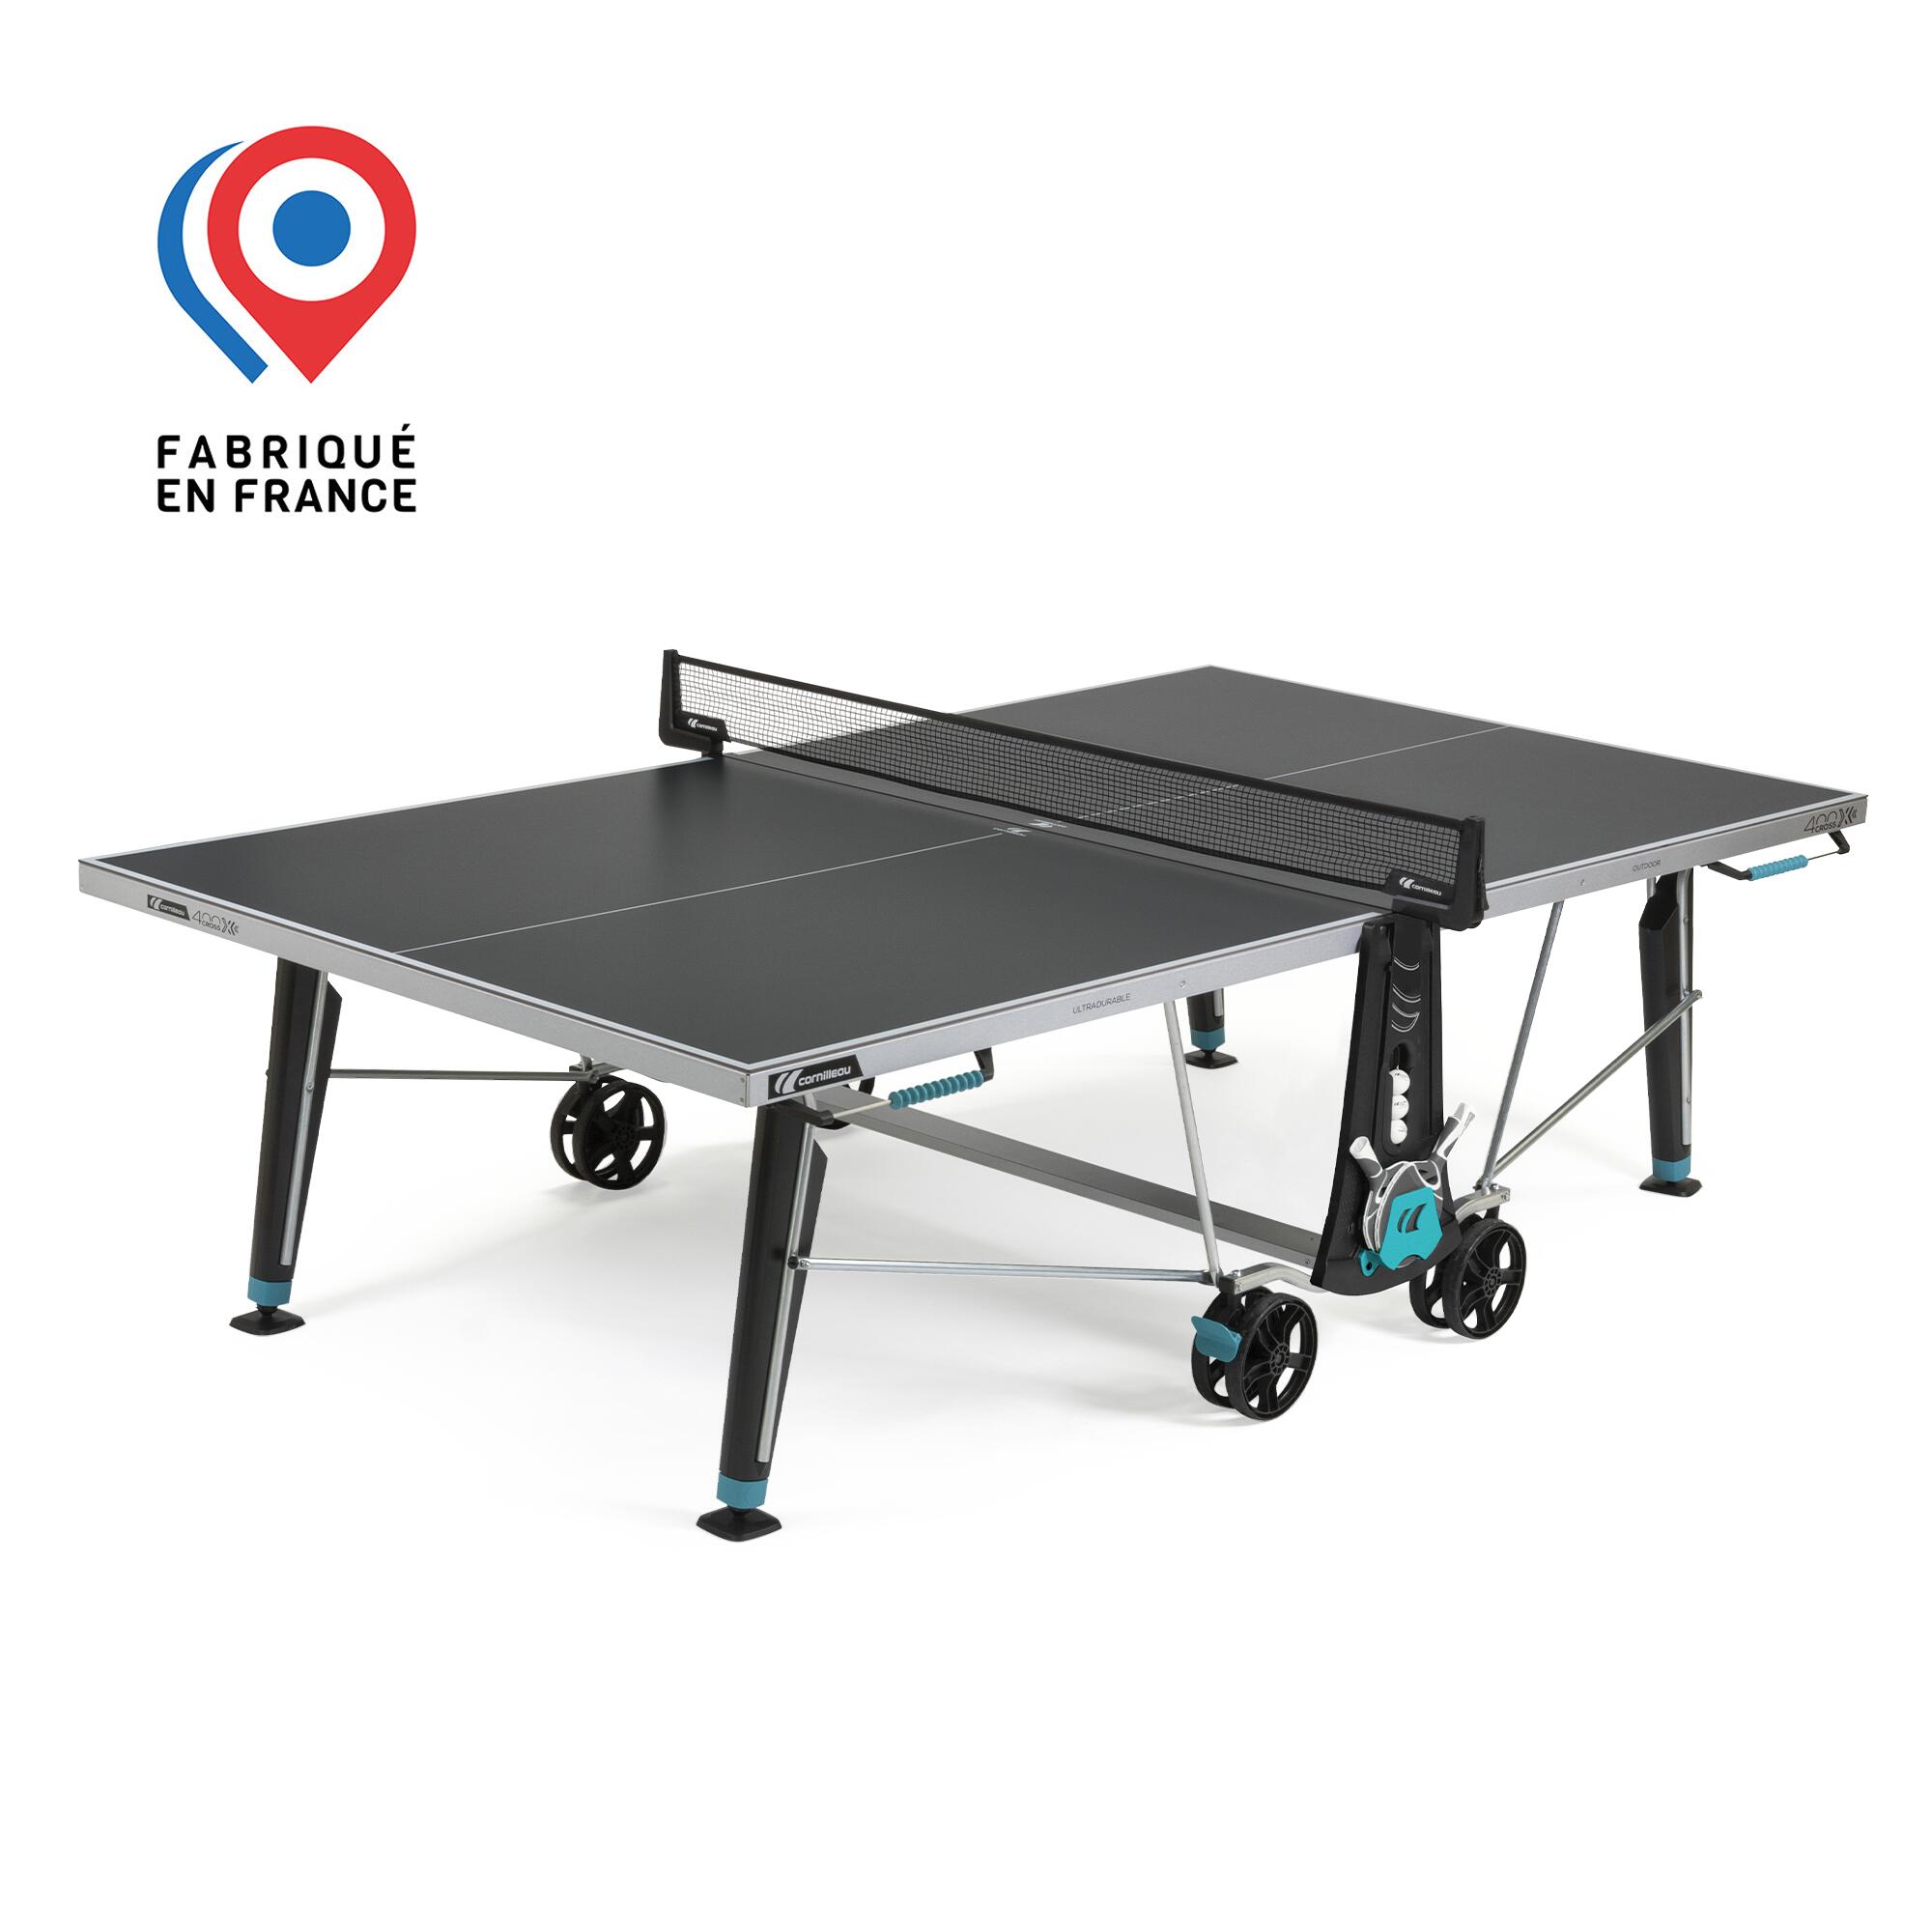 400X Sport Outdoor Table Tennis Table - Blue 1/8